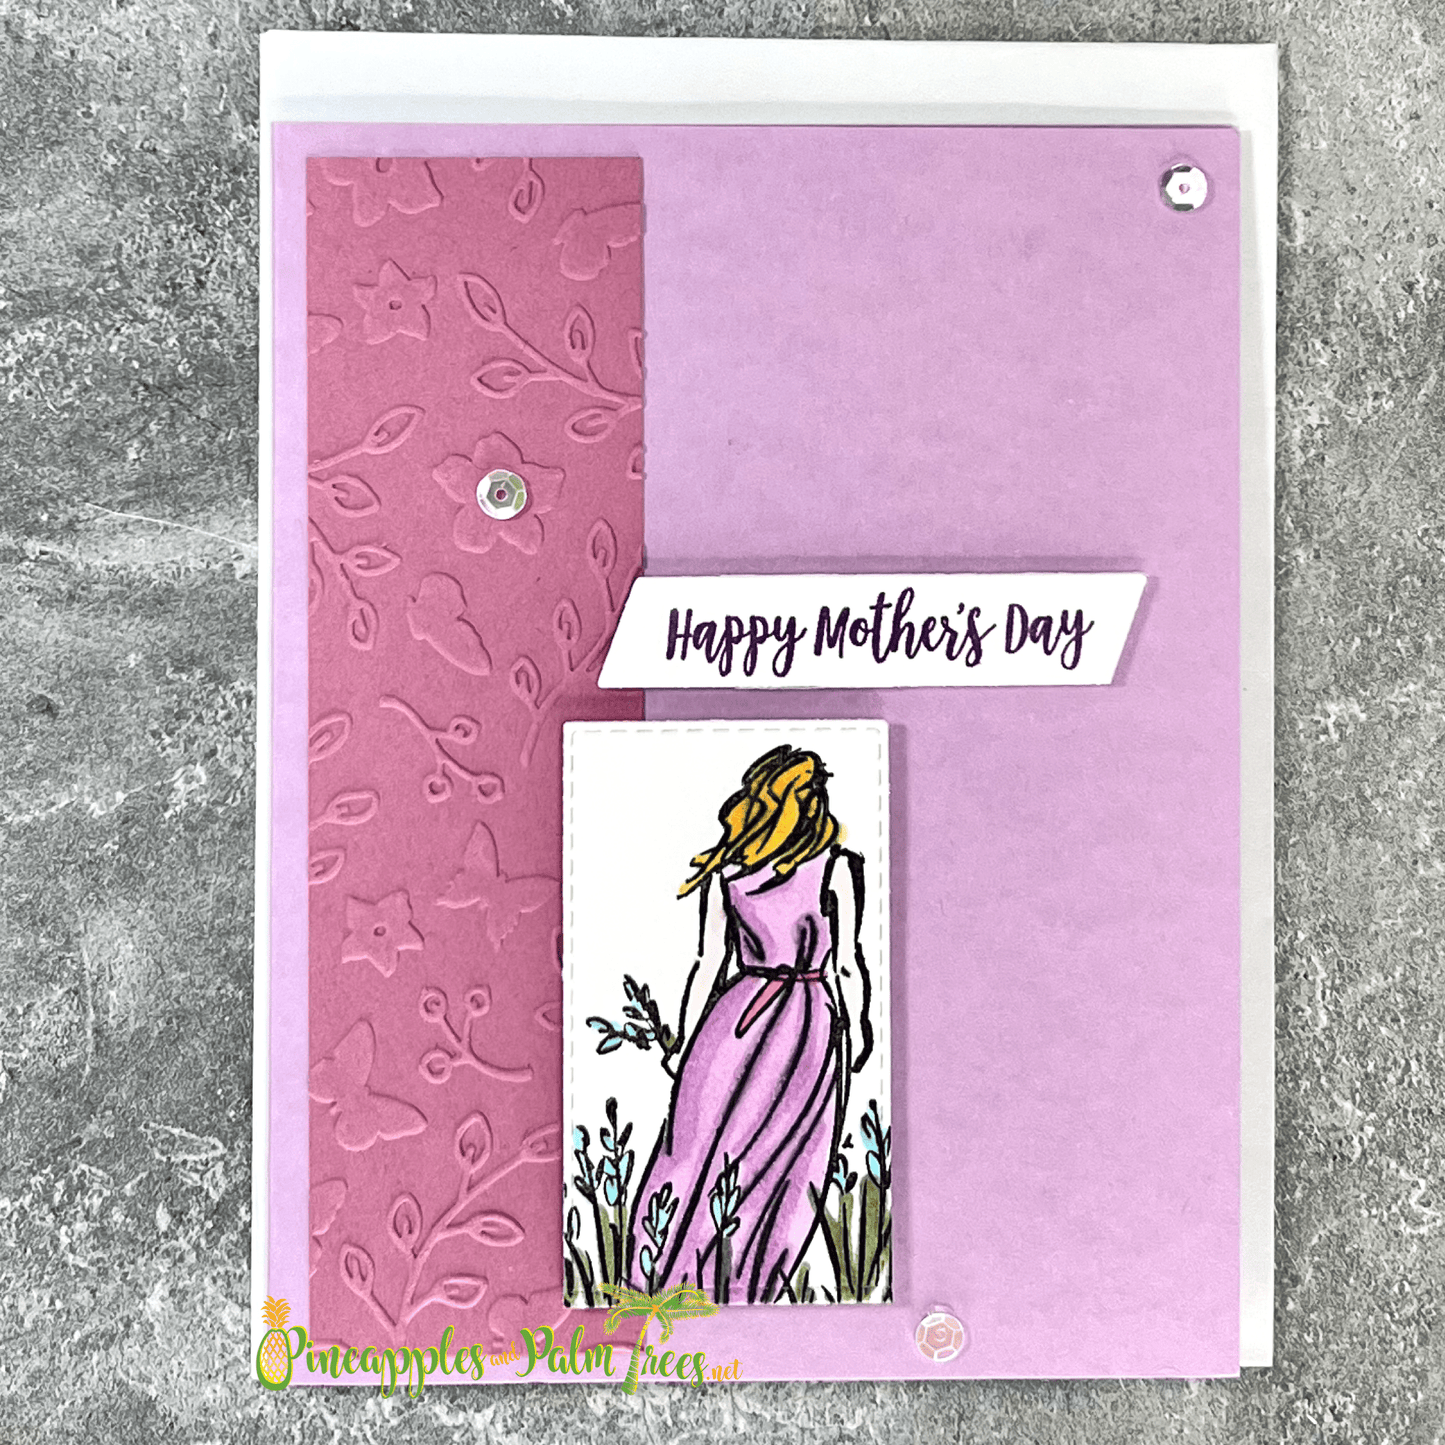 Greeting Card: Happy Mother's Day - pink